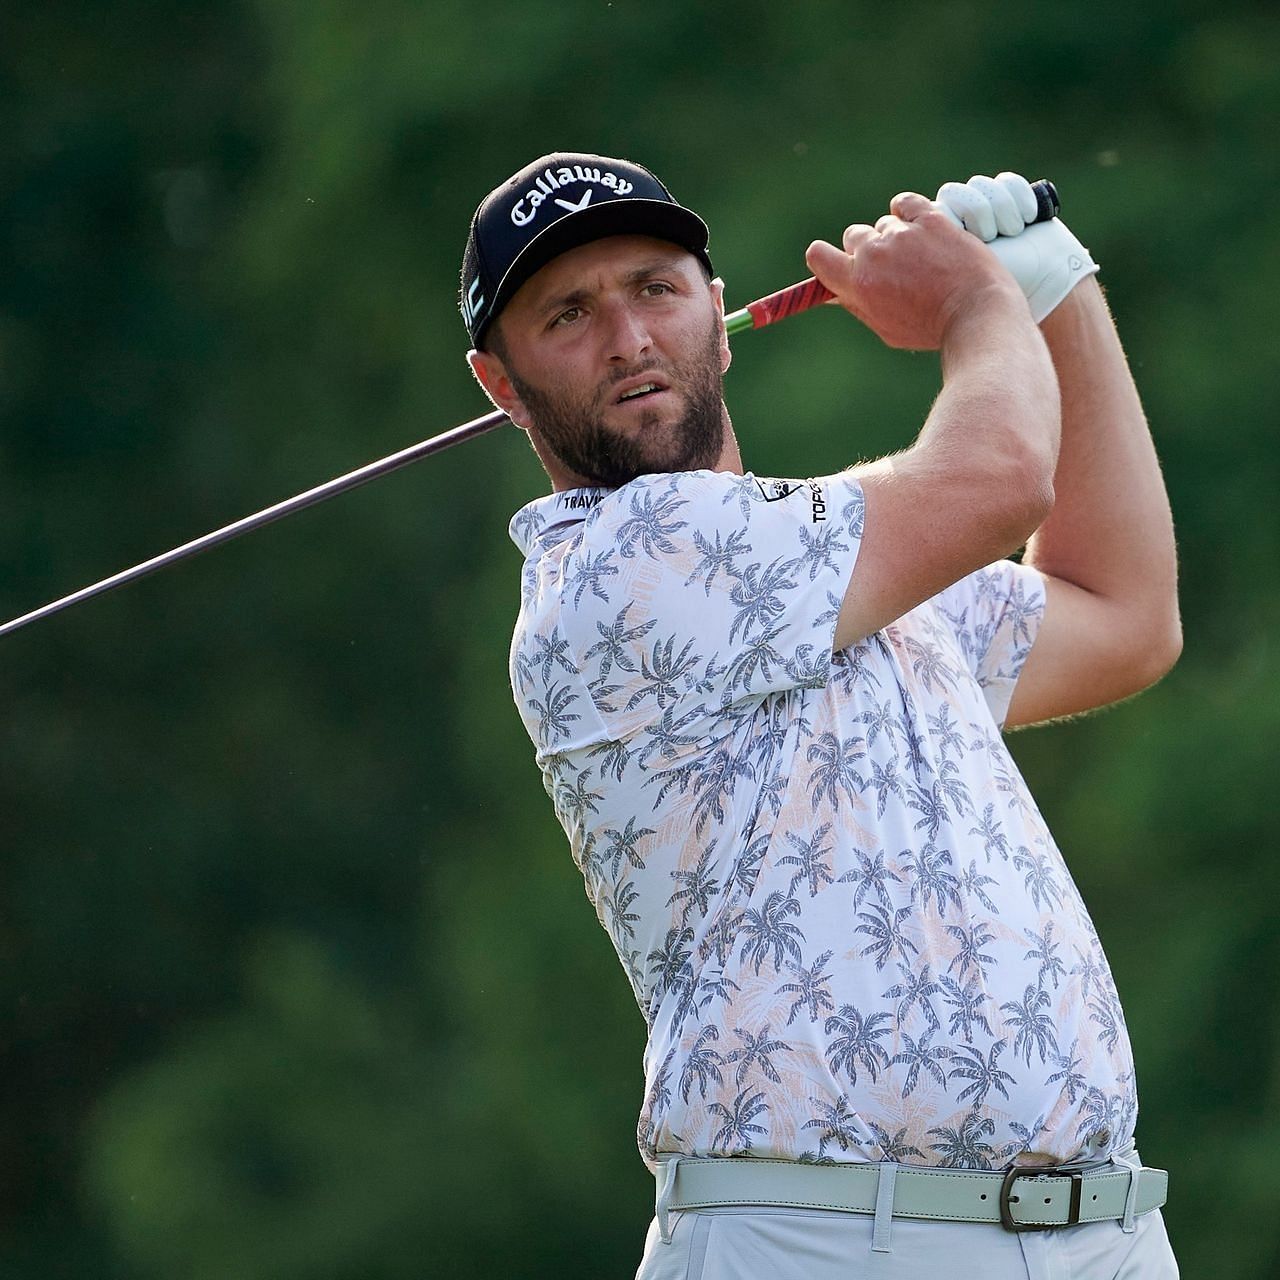 Jon Rahm is projected second in power rankings at Sentry Tournament of Champions